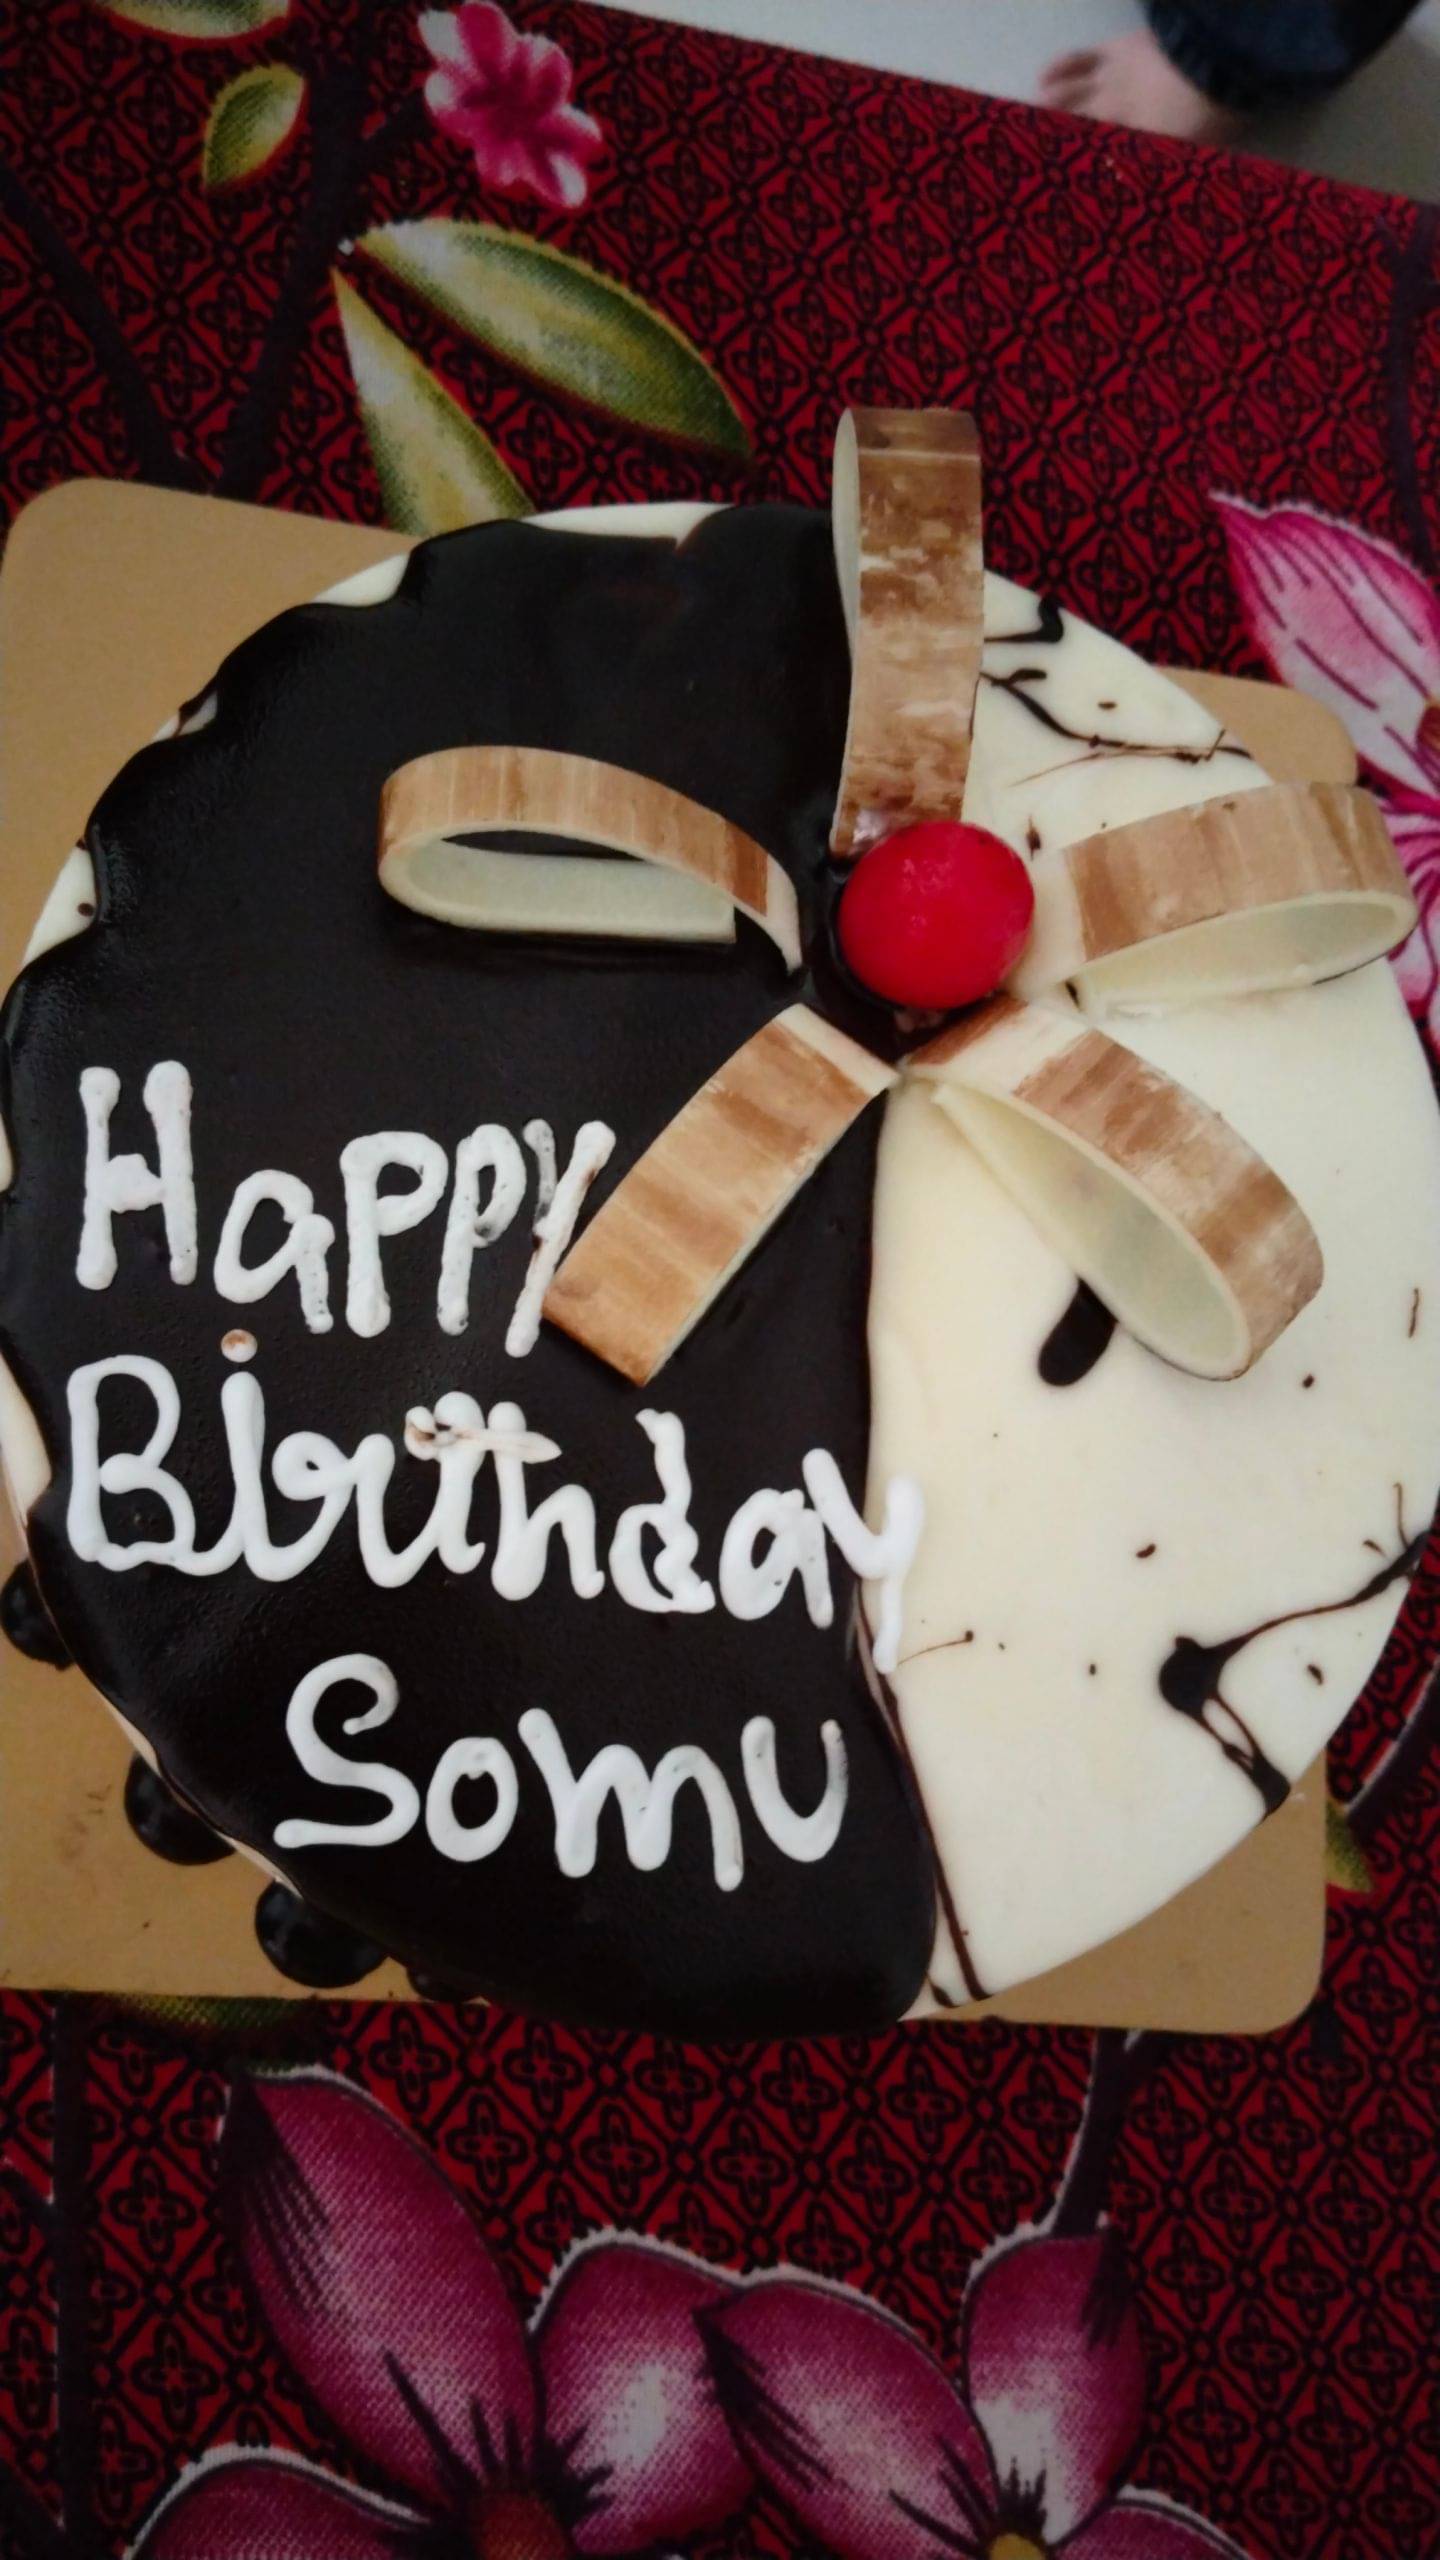 Abhijeet cuts the cake at the Birthday | Sonu Nigam Event Photo Gallery |  301510